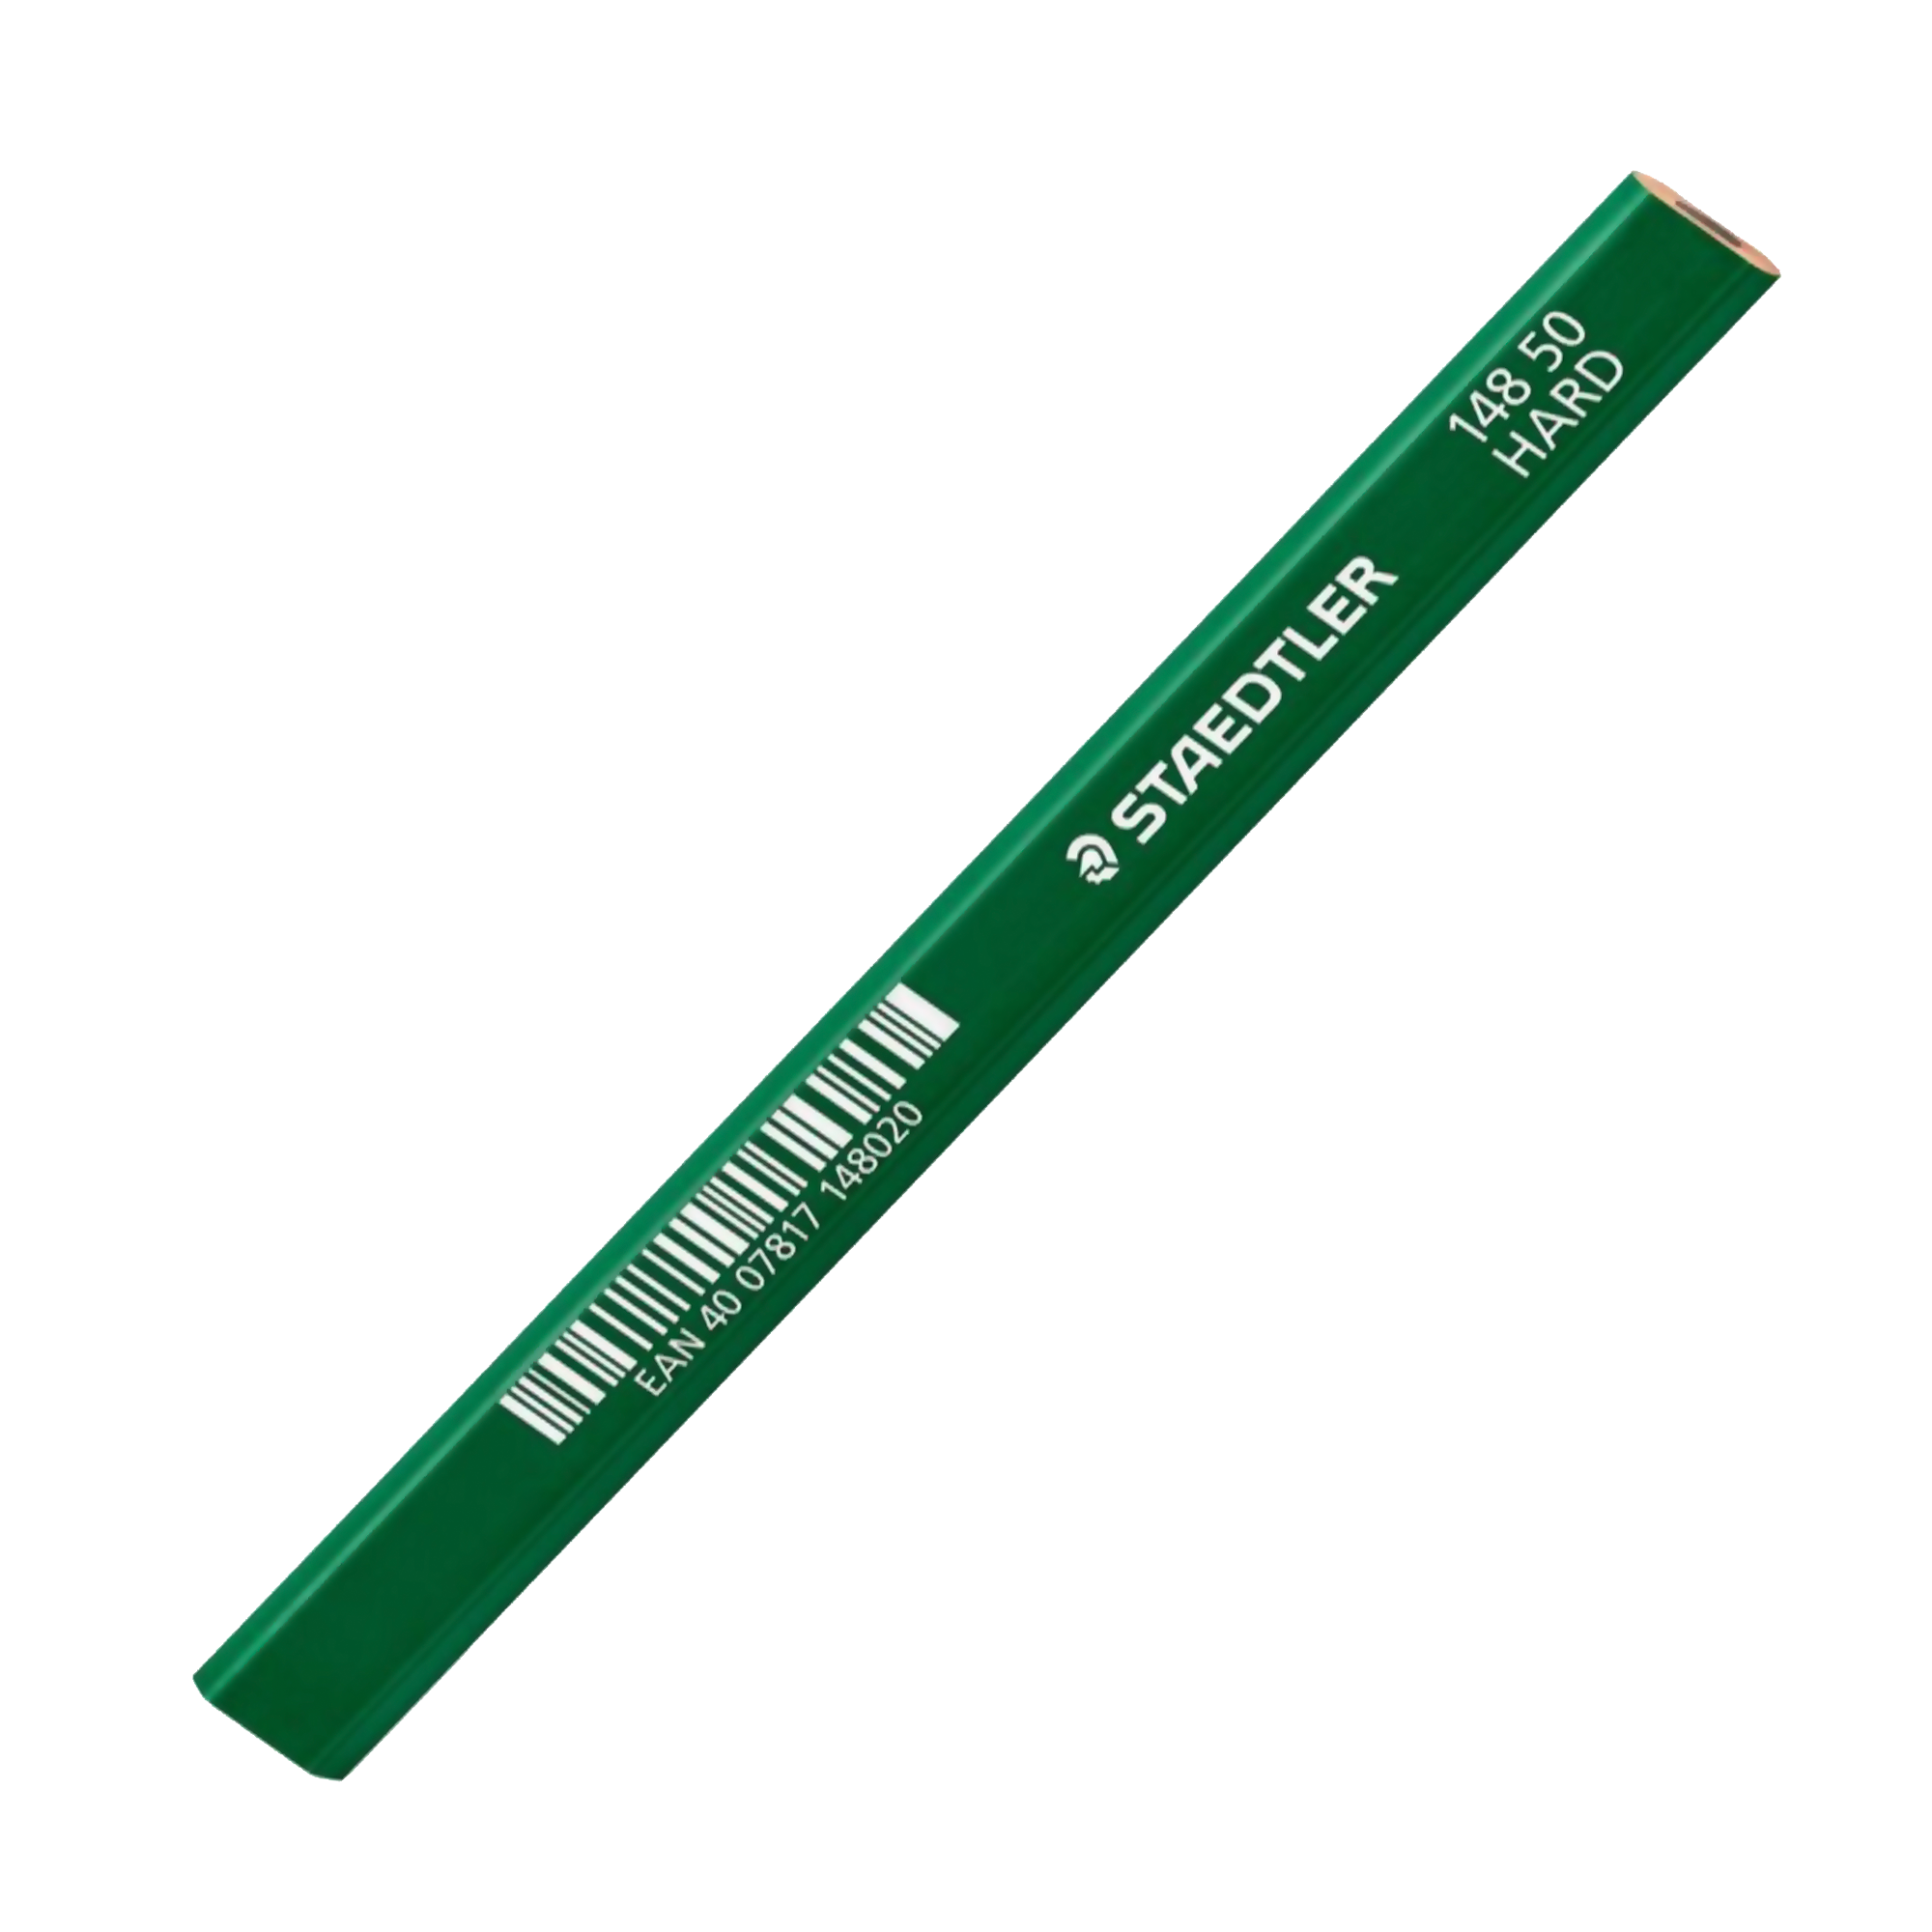 Hard Green Carpenters Pencil ST14850 by Staedtler